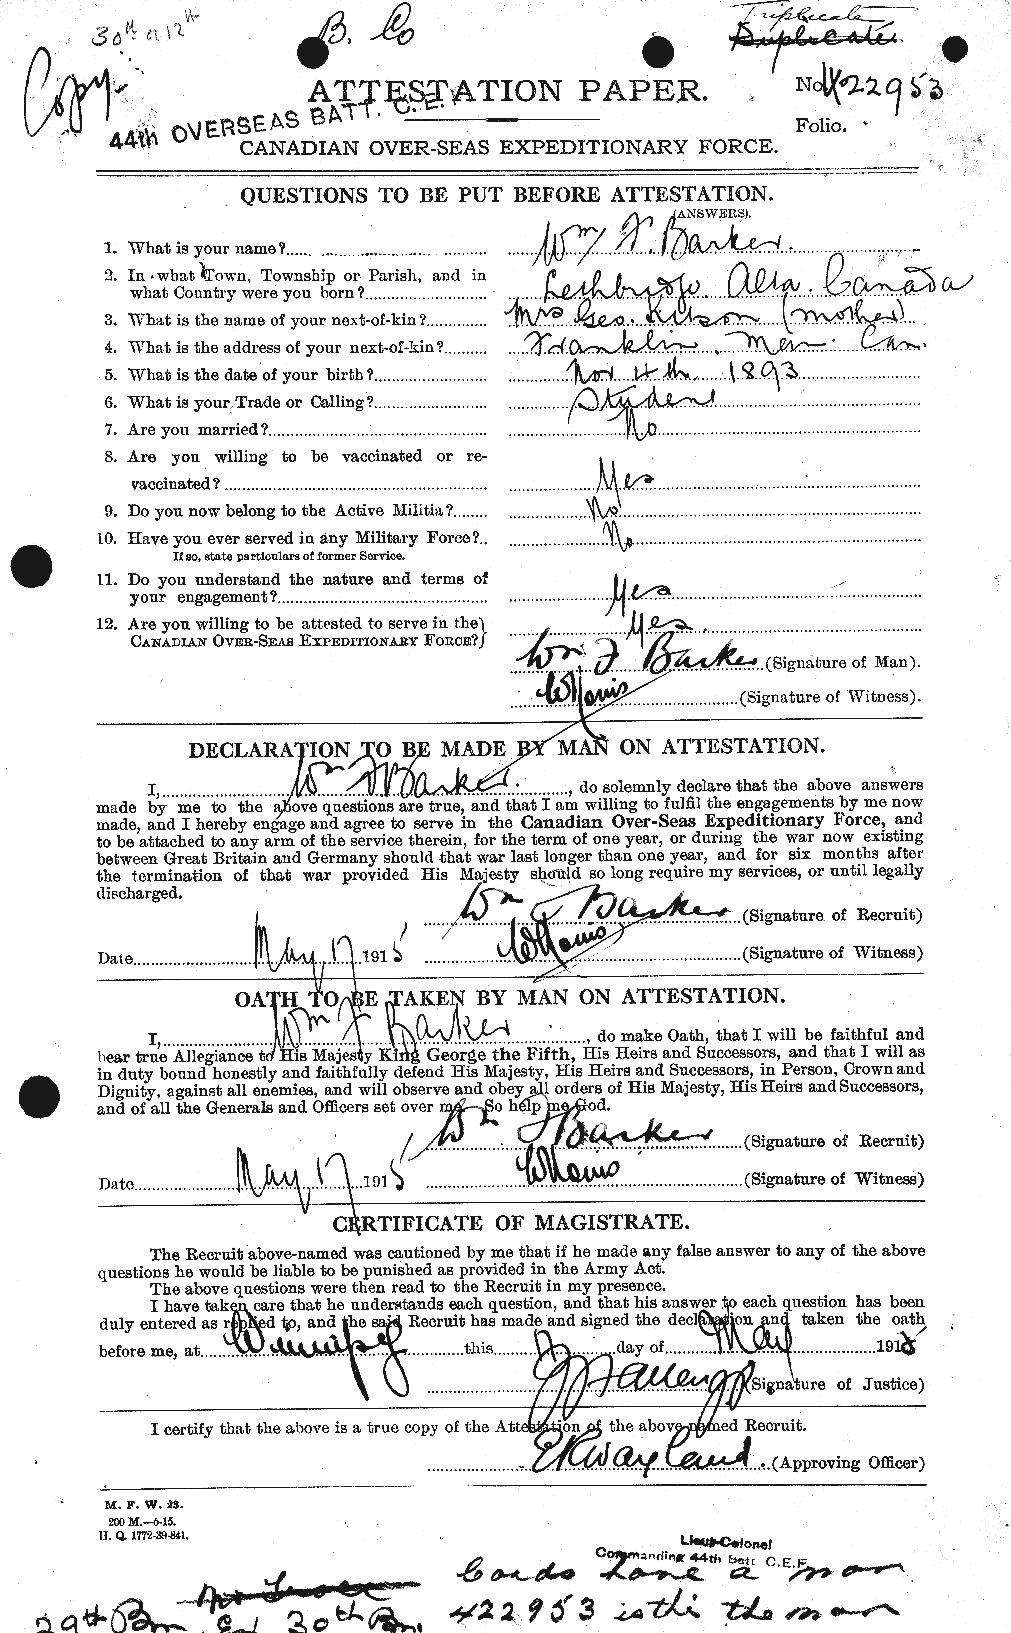 Personnel Records of the First World War - CEF 226902a